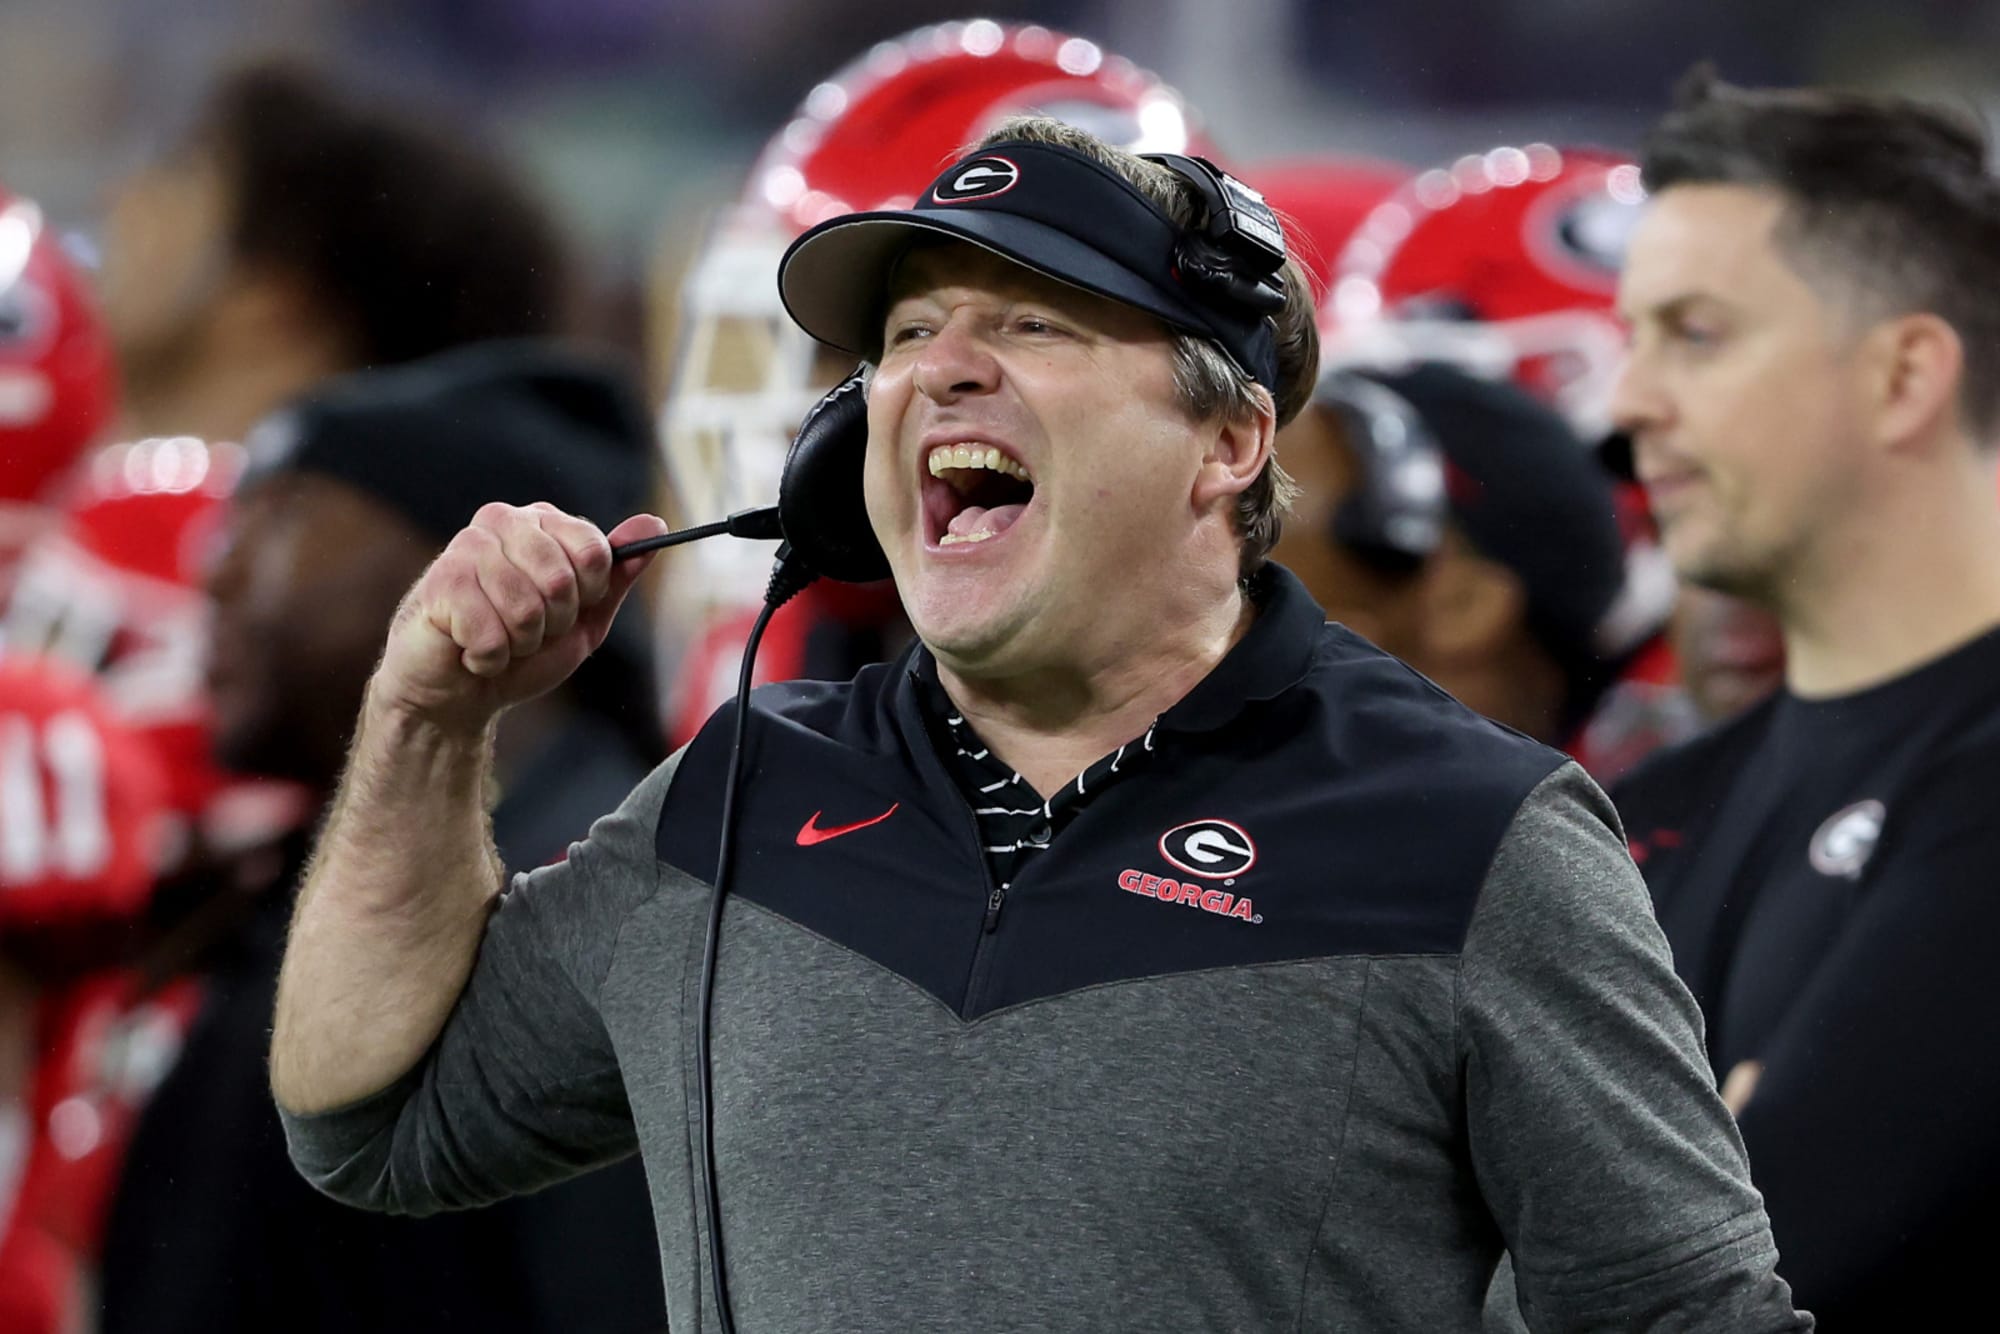 Georgia Football: Can the Bulldogs Three-Peat as National Champions in 2023?  